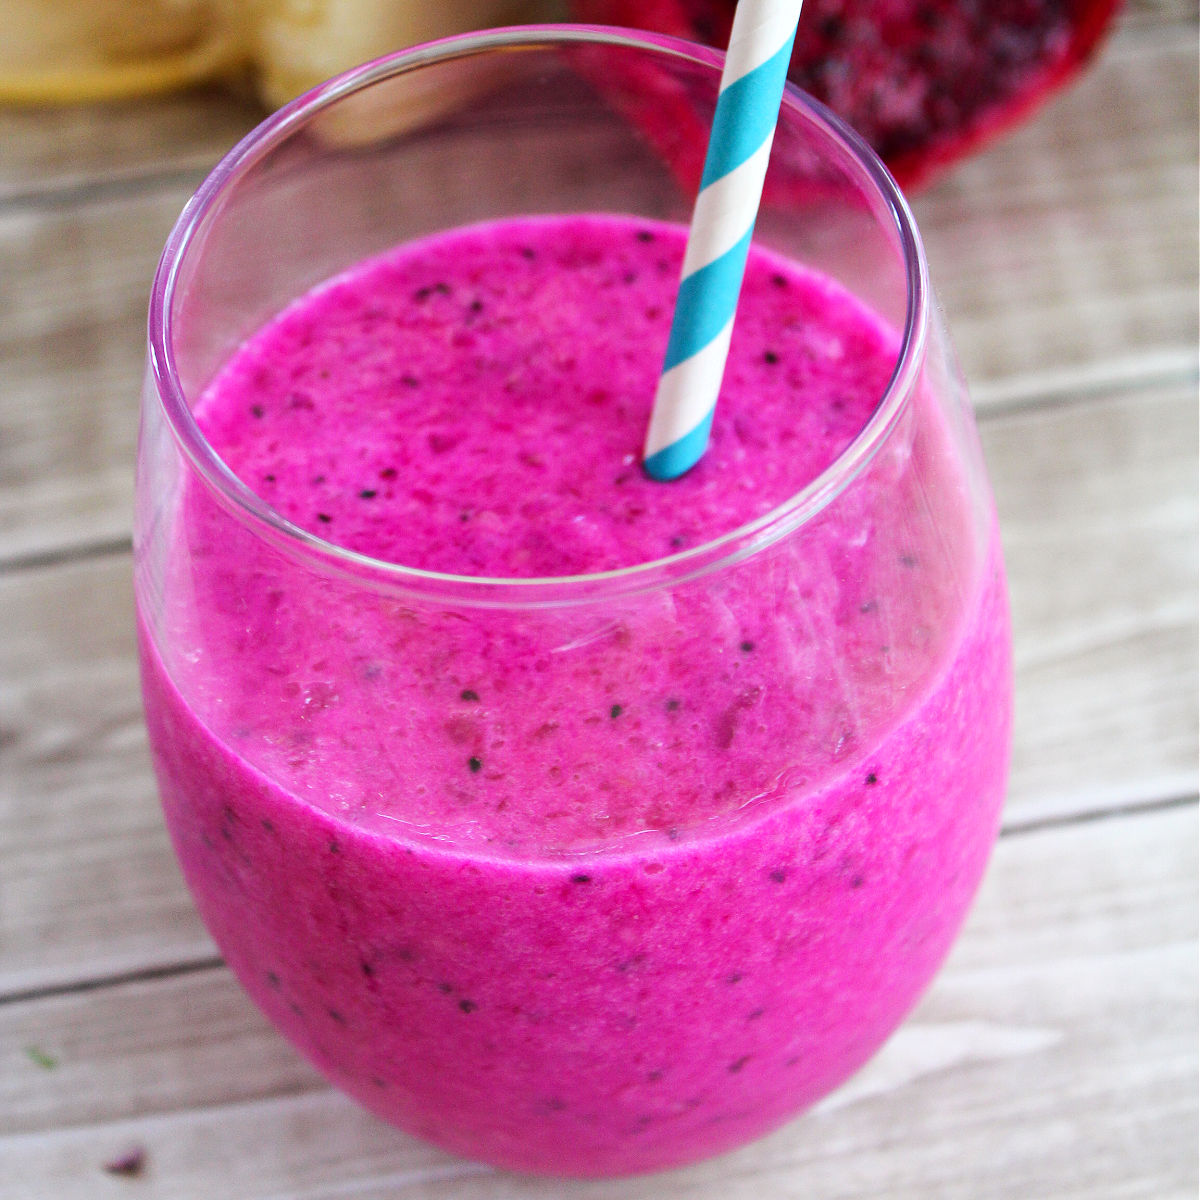 Dragonfruit smoothie in a glass jar with a white and blue paper straw on a light brown wood table background with some dragon fruit and banana behind it